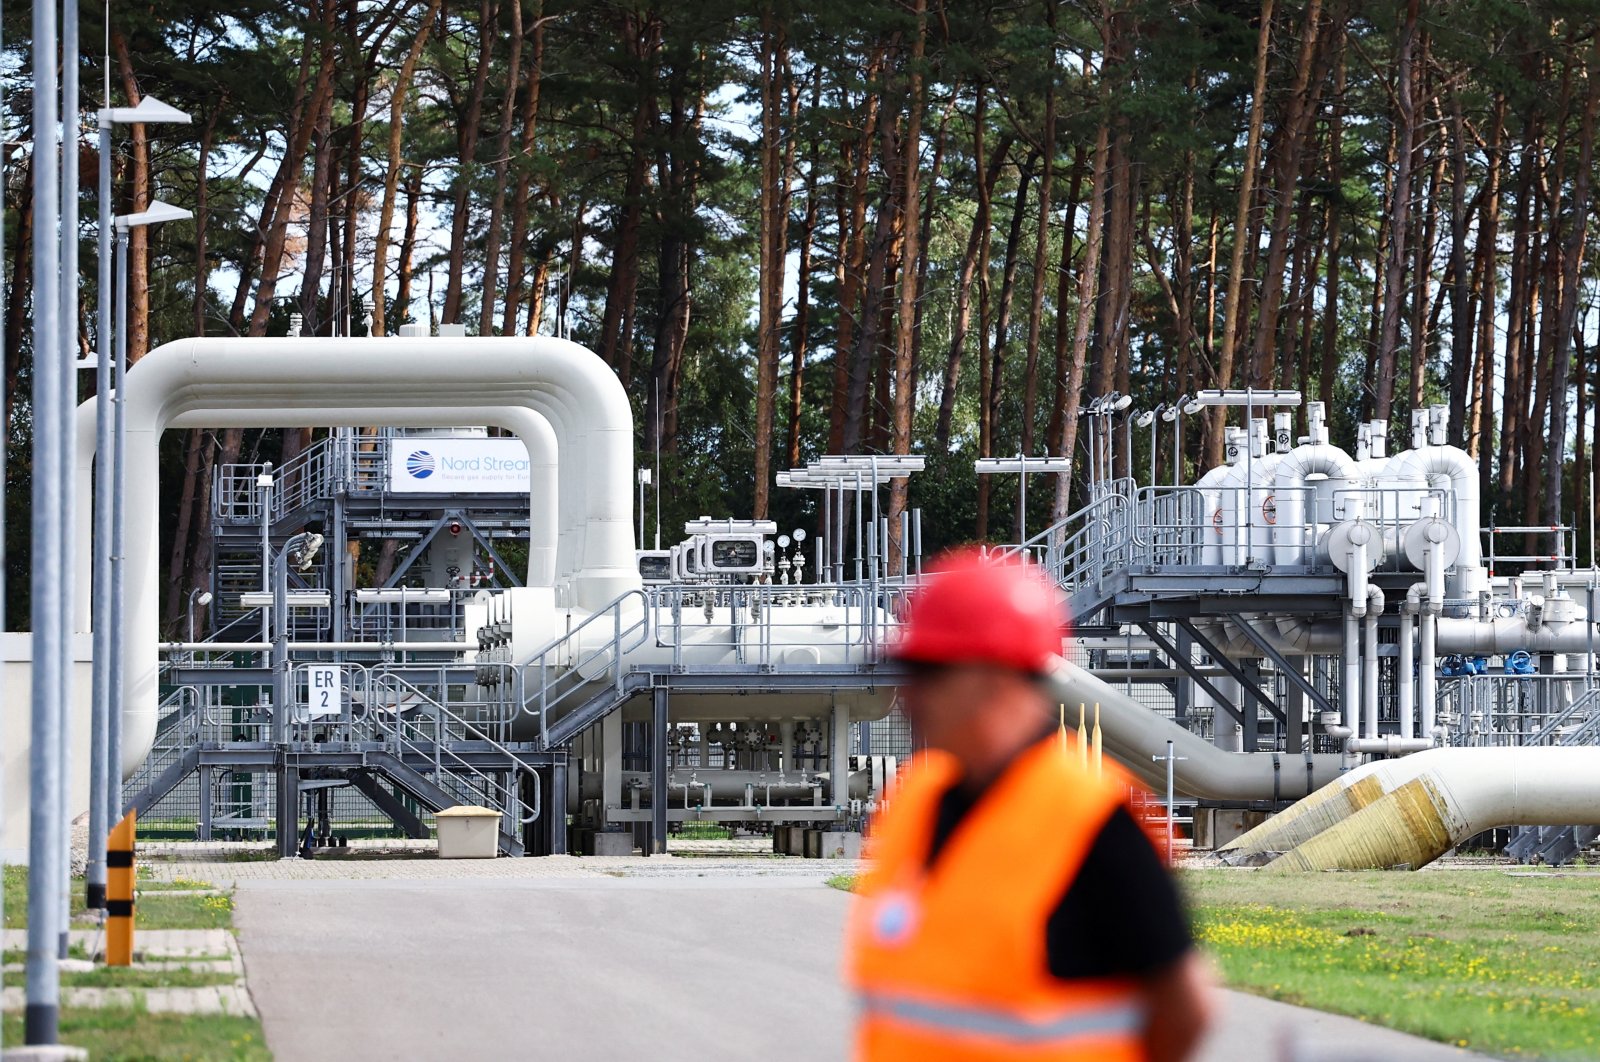 A view of the Nord Stream 1 Baltic Sea pipeline and transfer station in the industrial area of Lubmin, Germany, Aug. 30, 2022. (Reuters Photo)